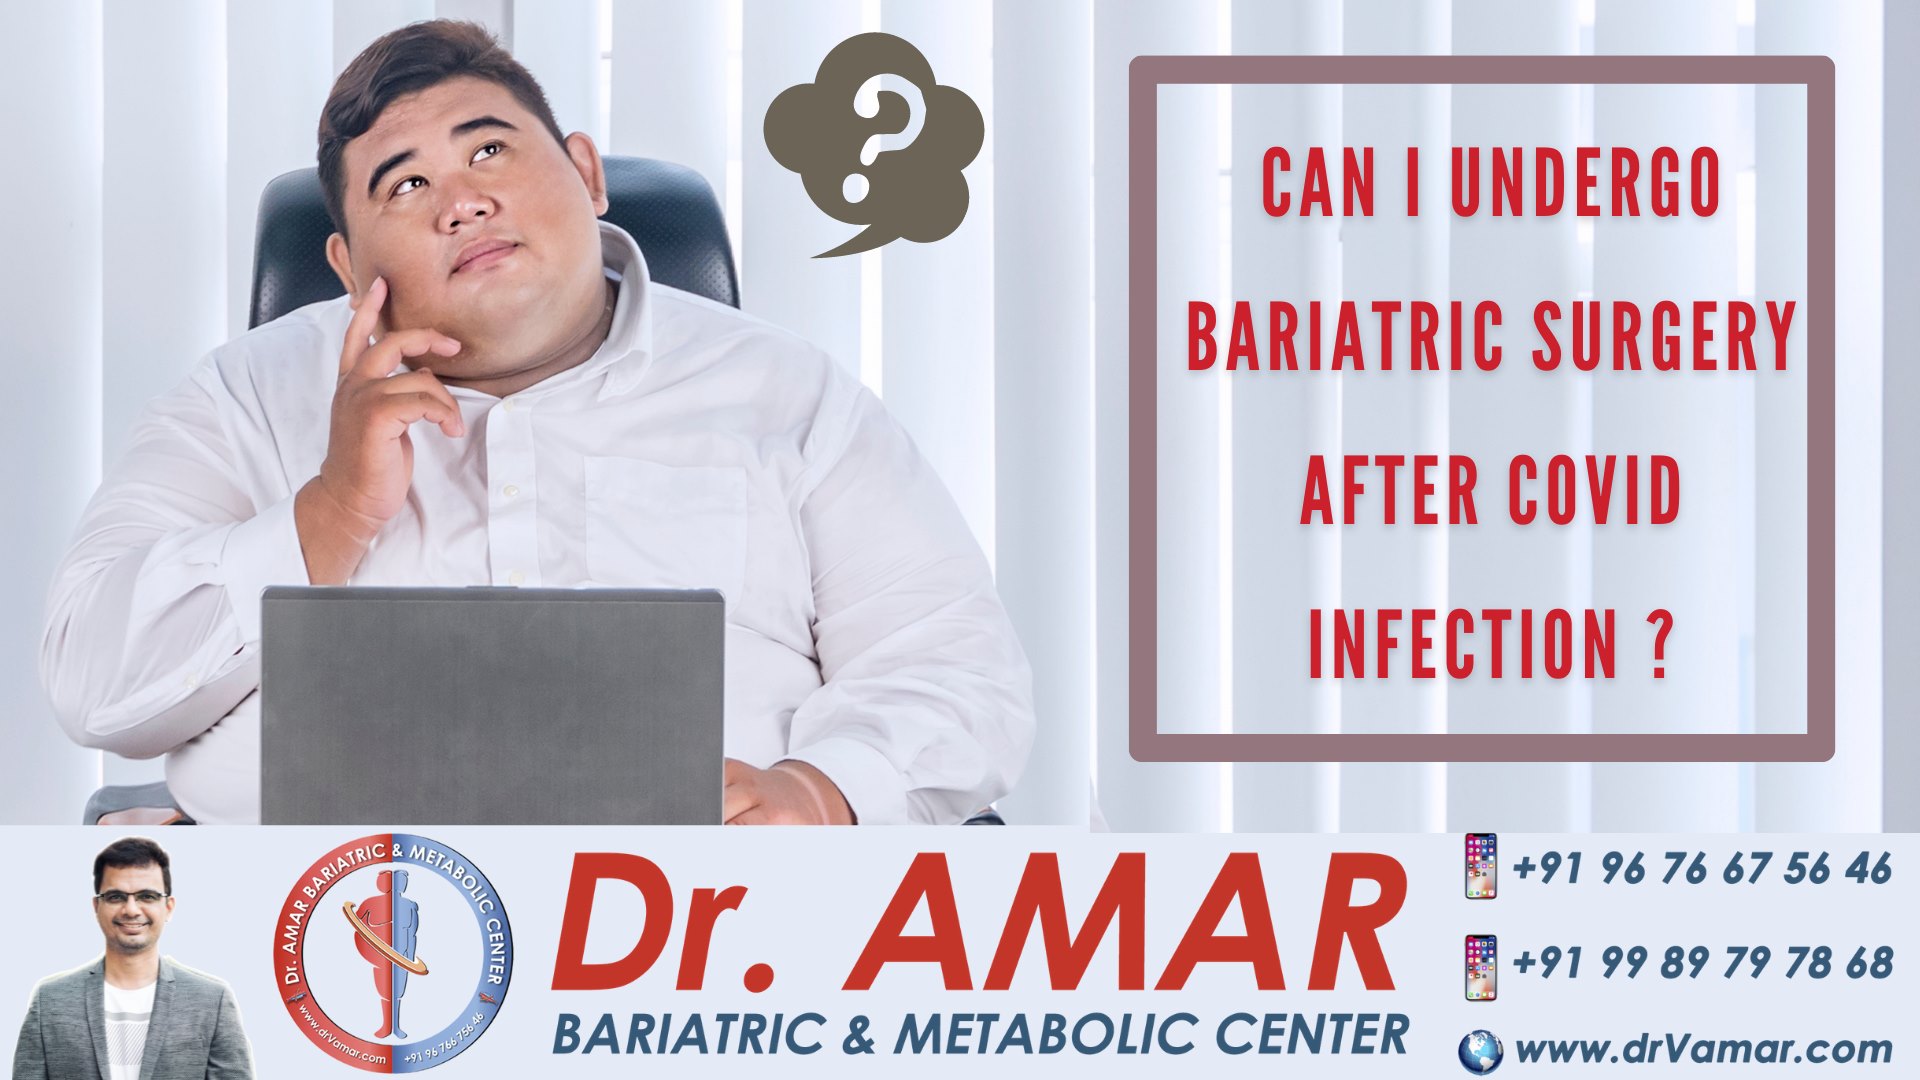 Can I Undergo Bariatric surgery after covid infection?